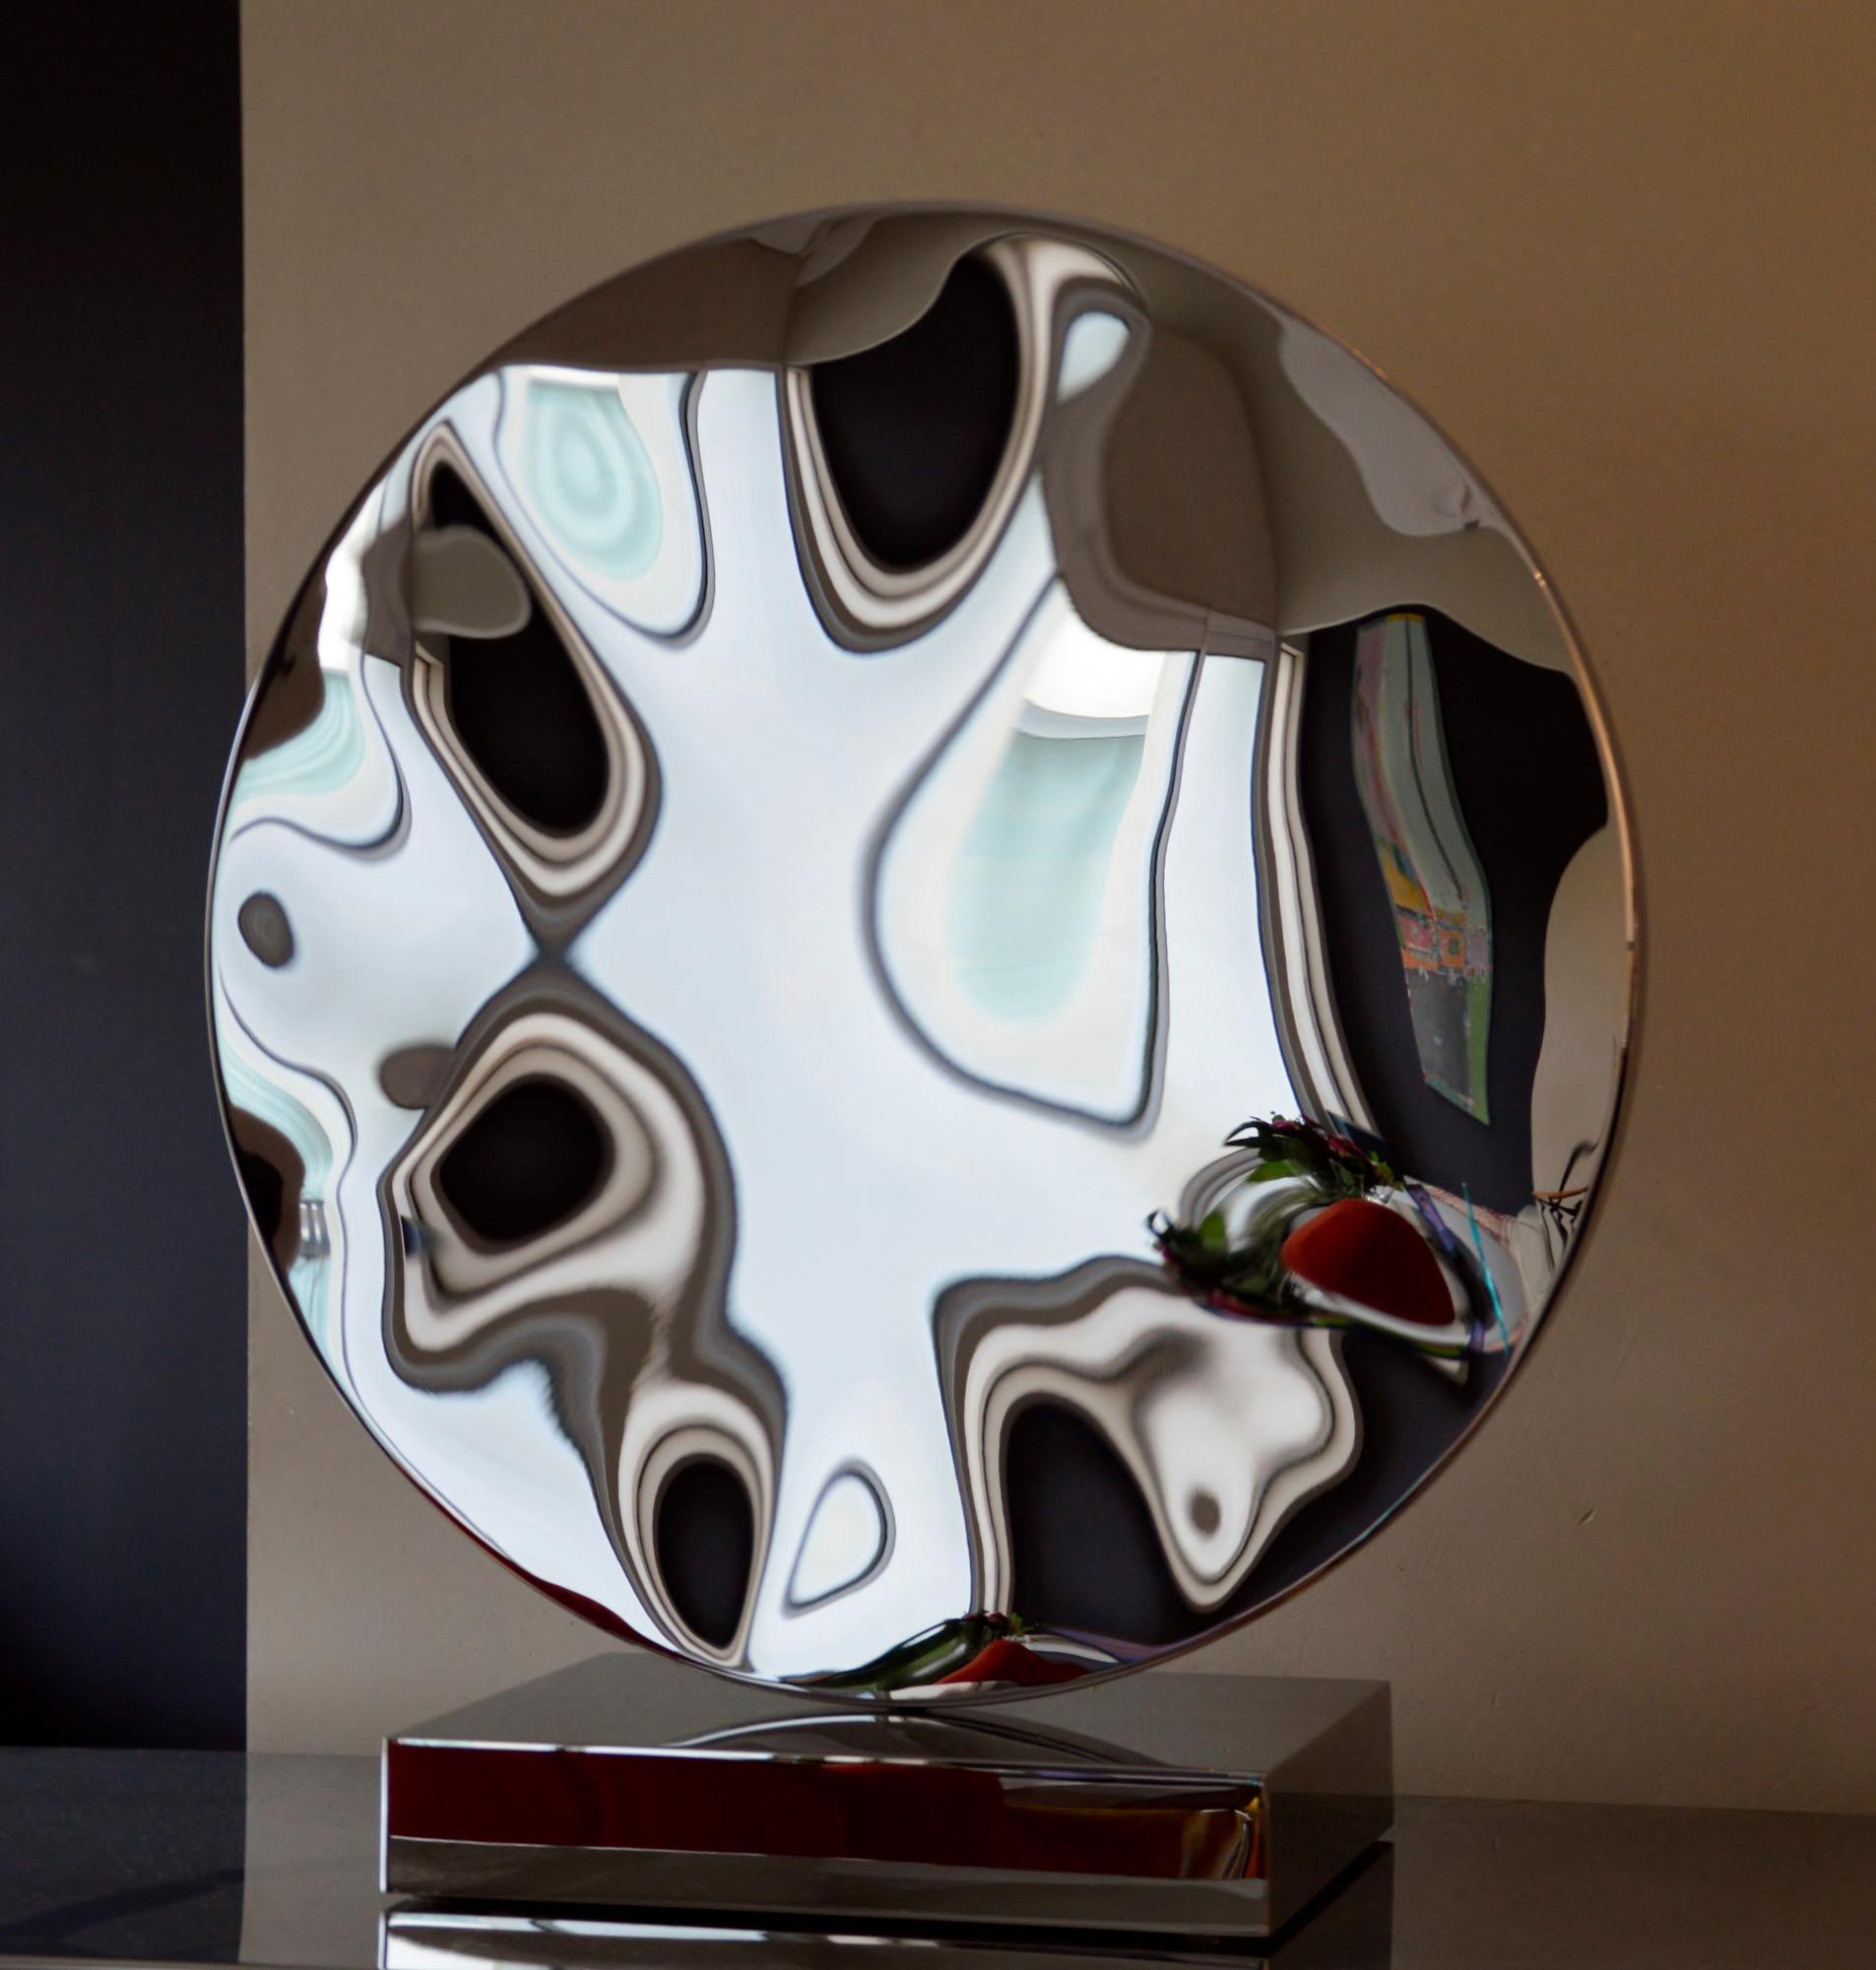 “Shattered” mirror I is a unique mirror-polished stainless steel sculpture and base by contemporary artist Franck K, dimensions are 69.5 × 63 × 23 cm (27.4 × 24.8 × 9.1 in). 
The sculpture is signed and comes with a certificate of authenticity.

The